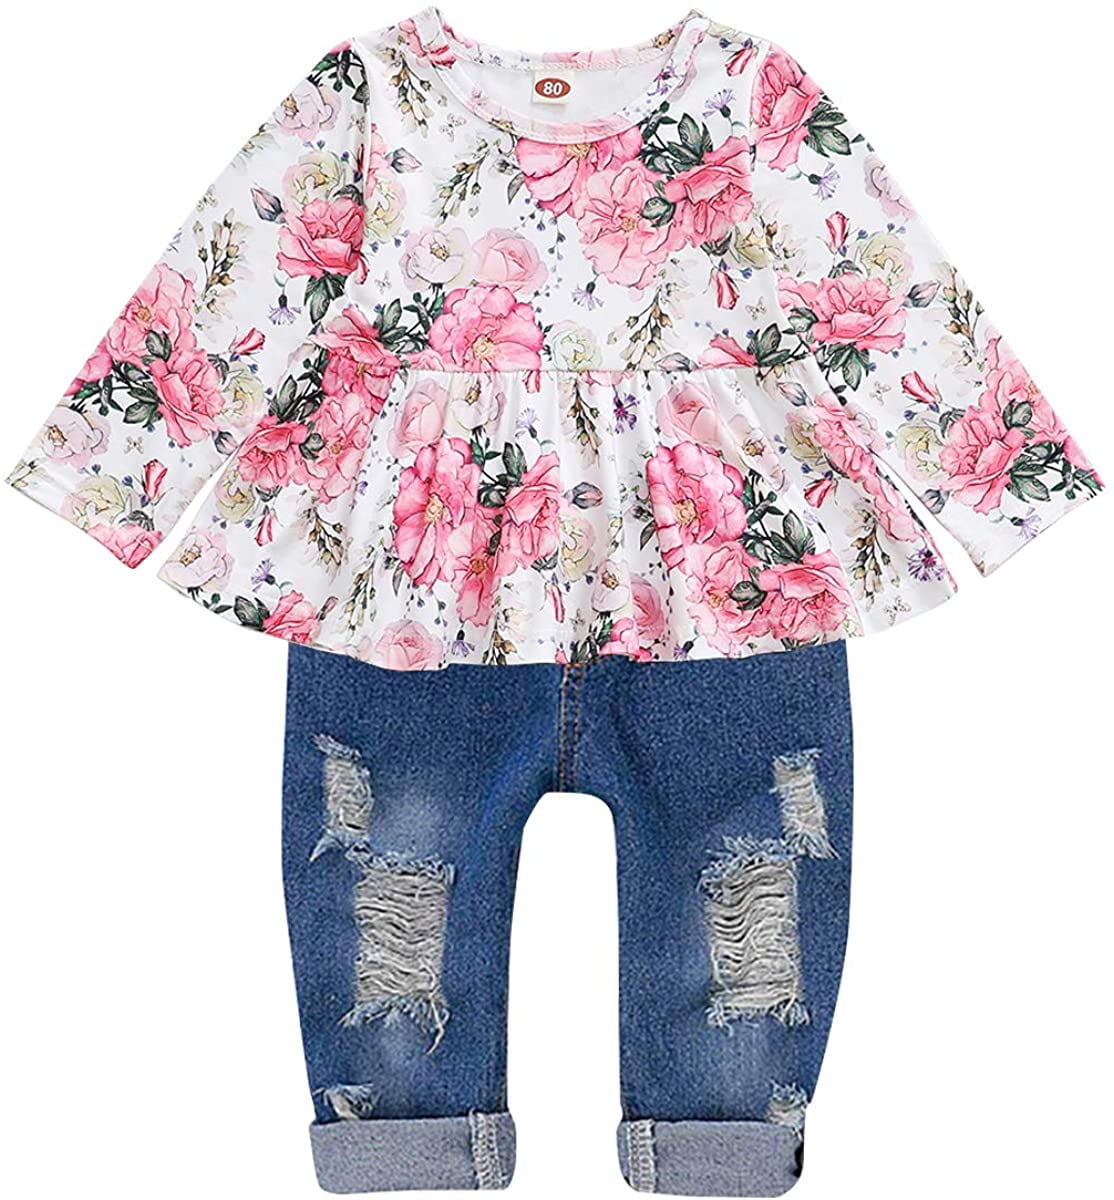 CARETOO Girls Clothes Outfits Cute Baby Girl Floral Long Sleeve Pant Set Flower Ruffle Top 